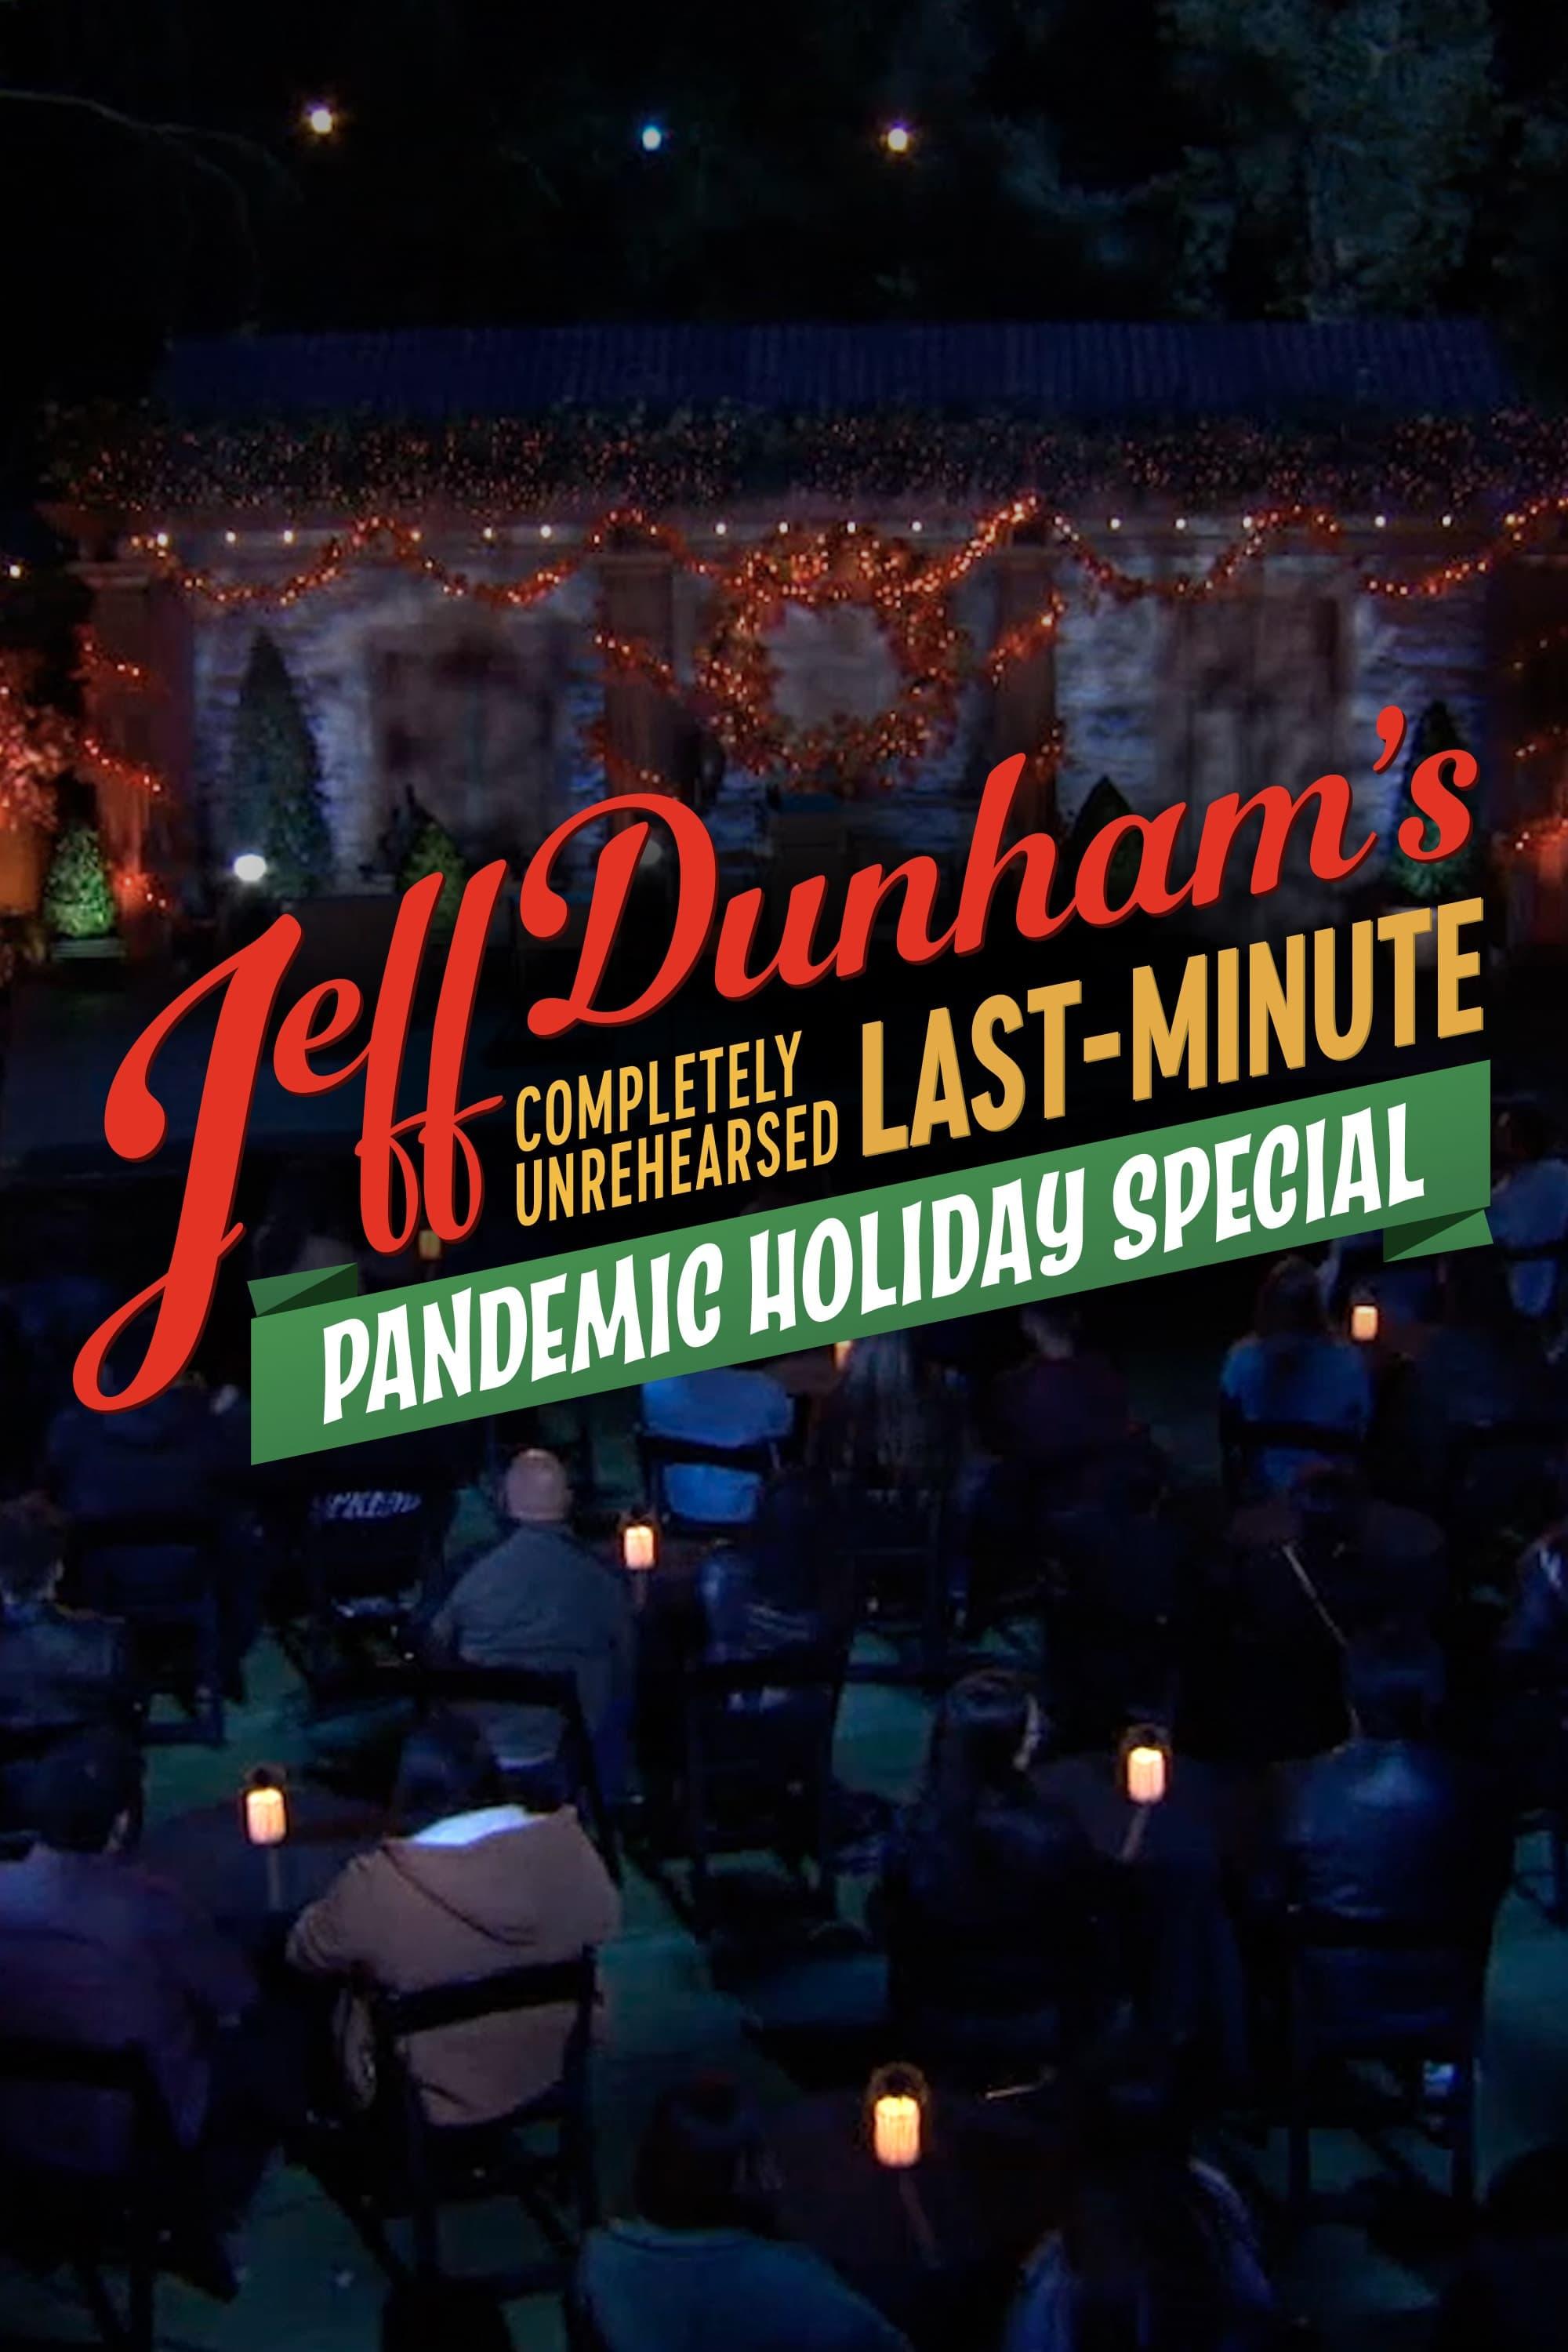 Jeff Dunham's Completely Unrehearsed Last-Minute Pandemic Holiday Special poster